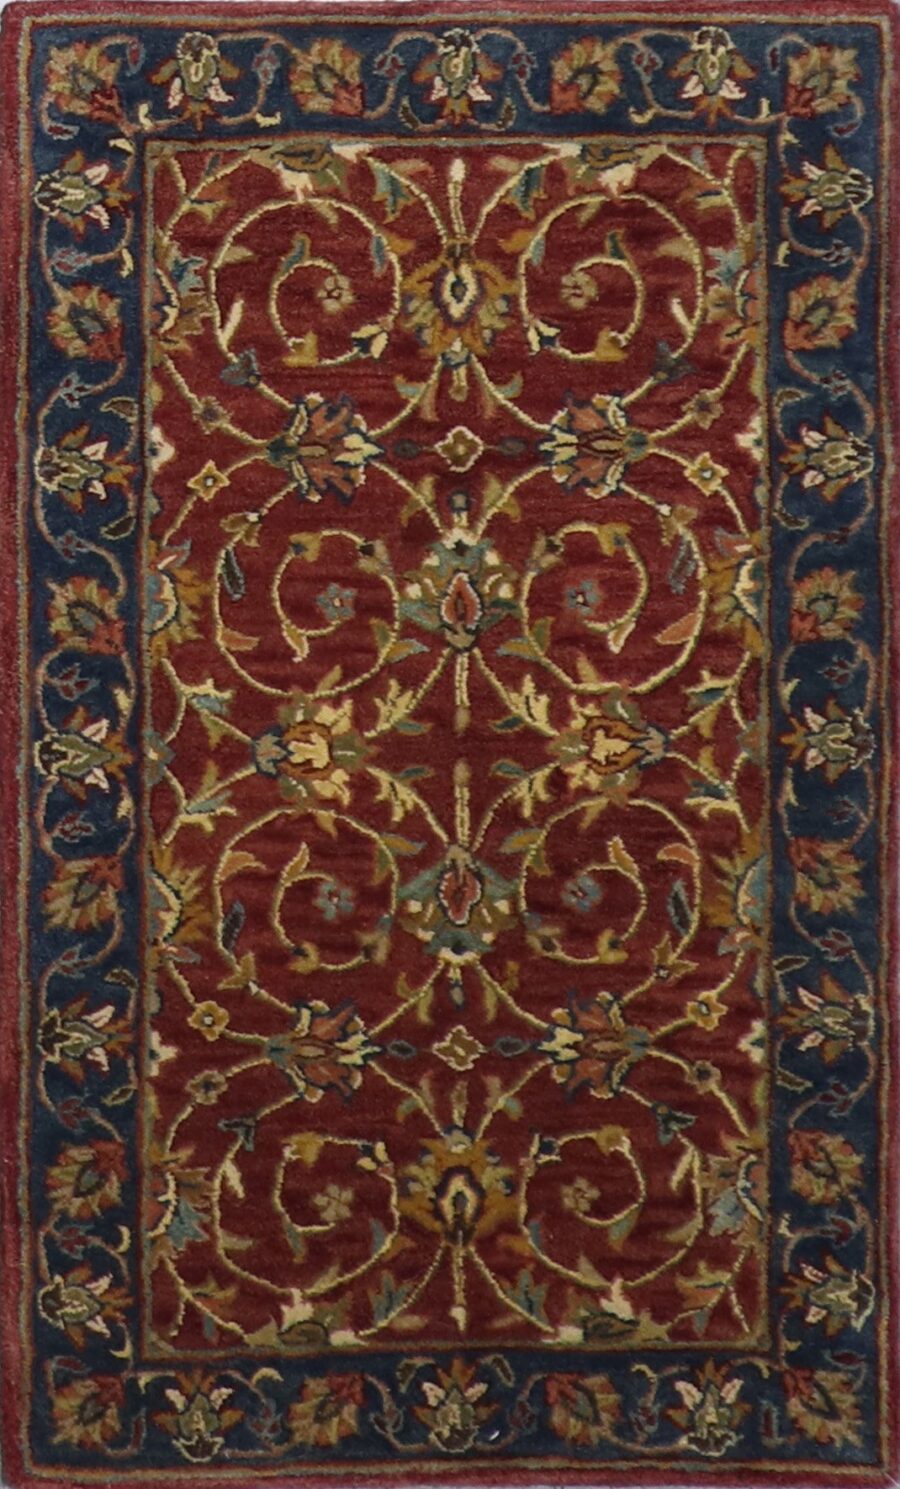 3’x5’ Decorative Burgundy Wool Hand-Tufted Rug - Direct Rug Import | Rugs in Chicago, Indiana,South Bend,Granger